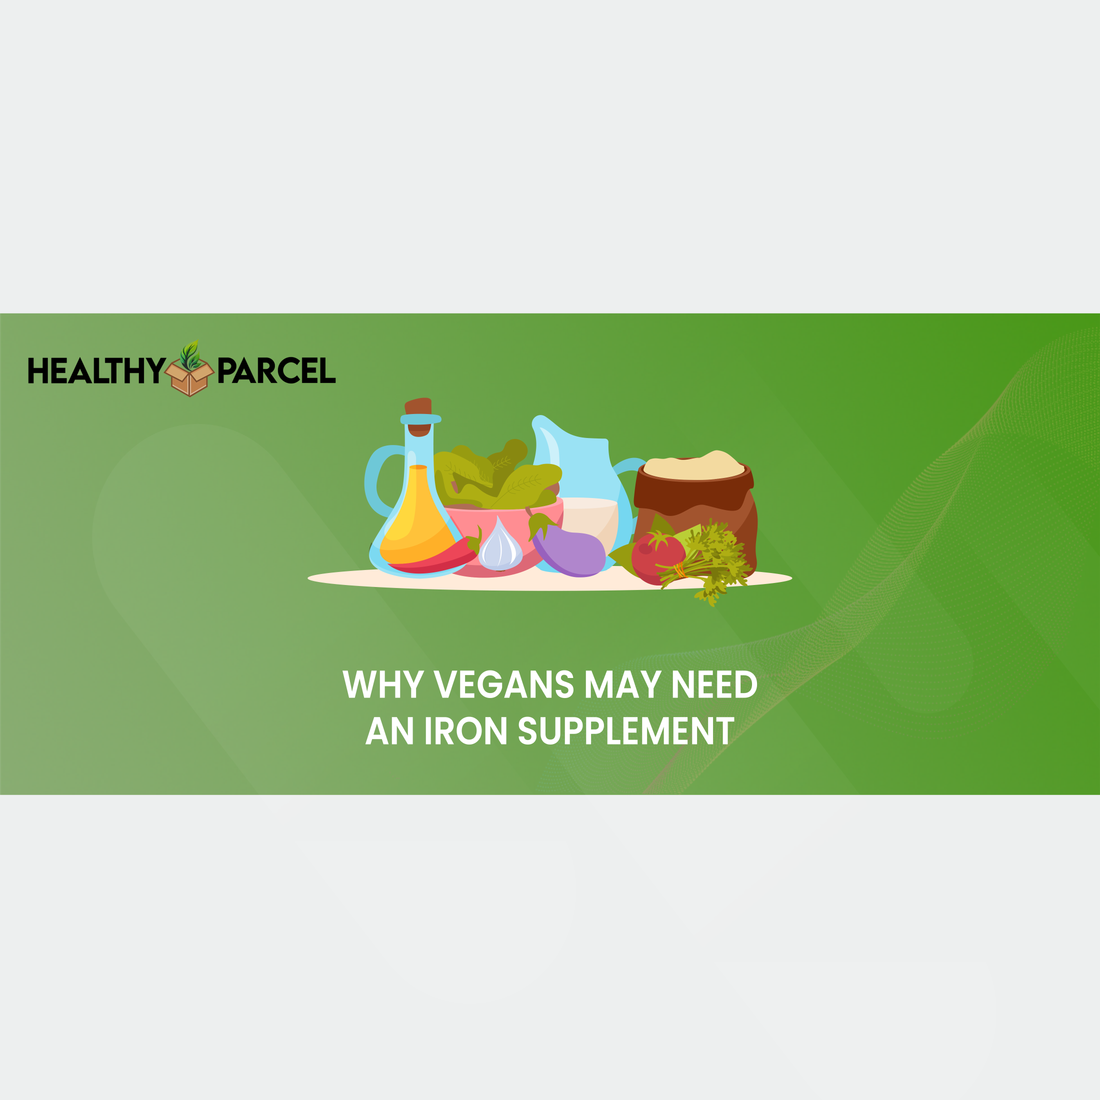 Why Vegans May Need an Iron Supplement